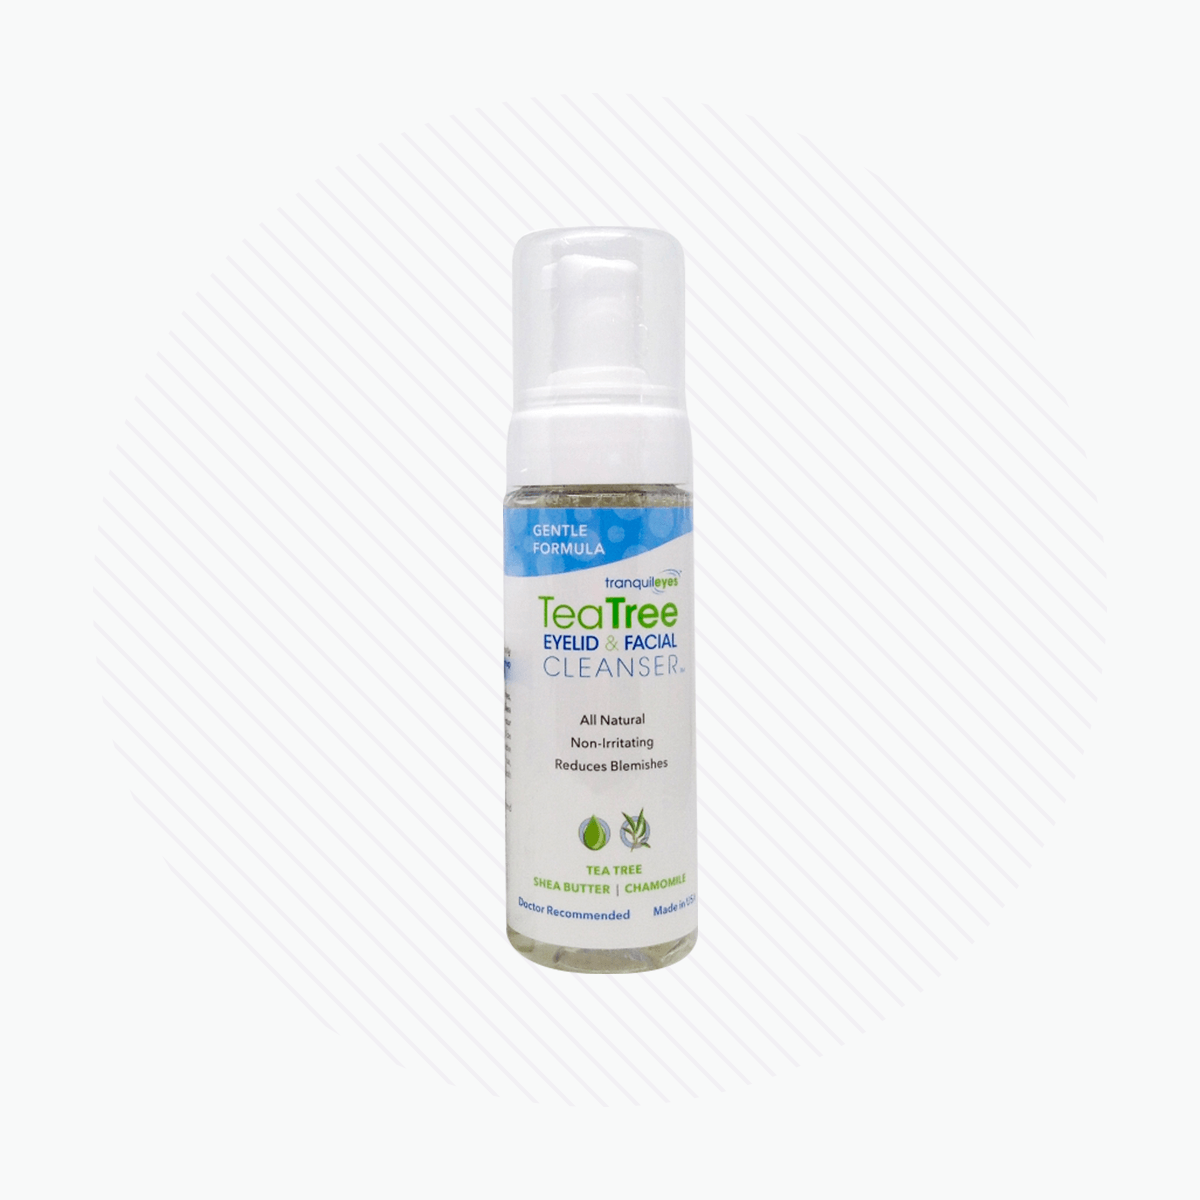 Tranquil Eyes - Gentle Formula 1% Tea Tree Eyelid & Facial Cleanser (2 Sizes) - DryEye Rescue Store